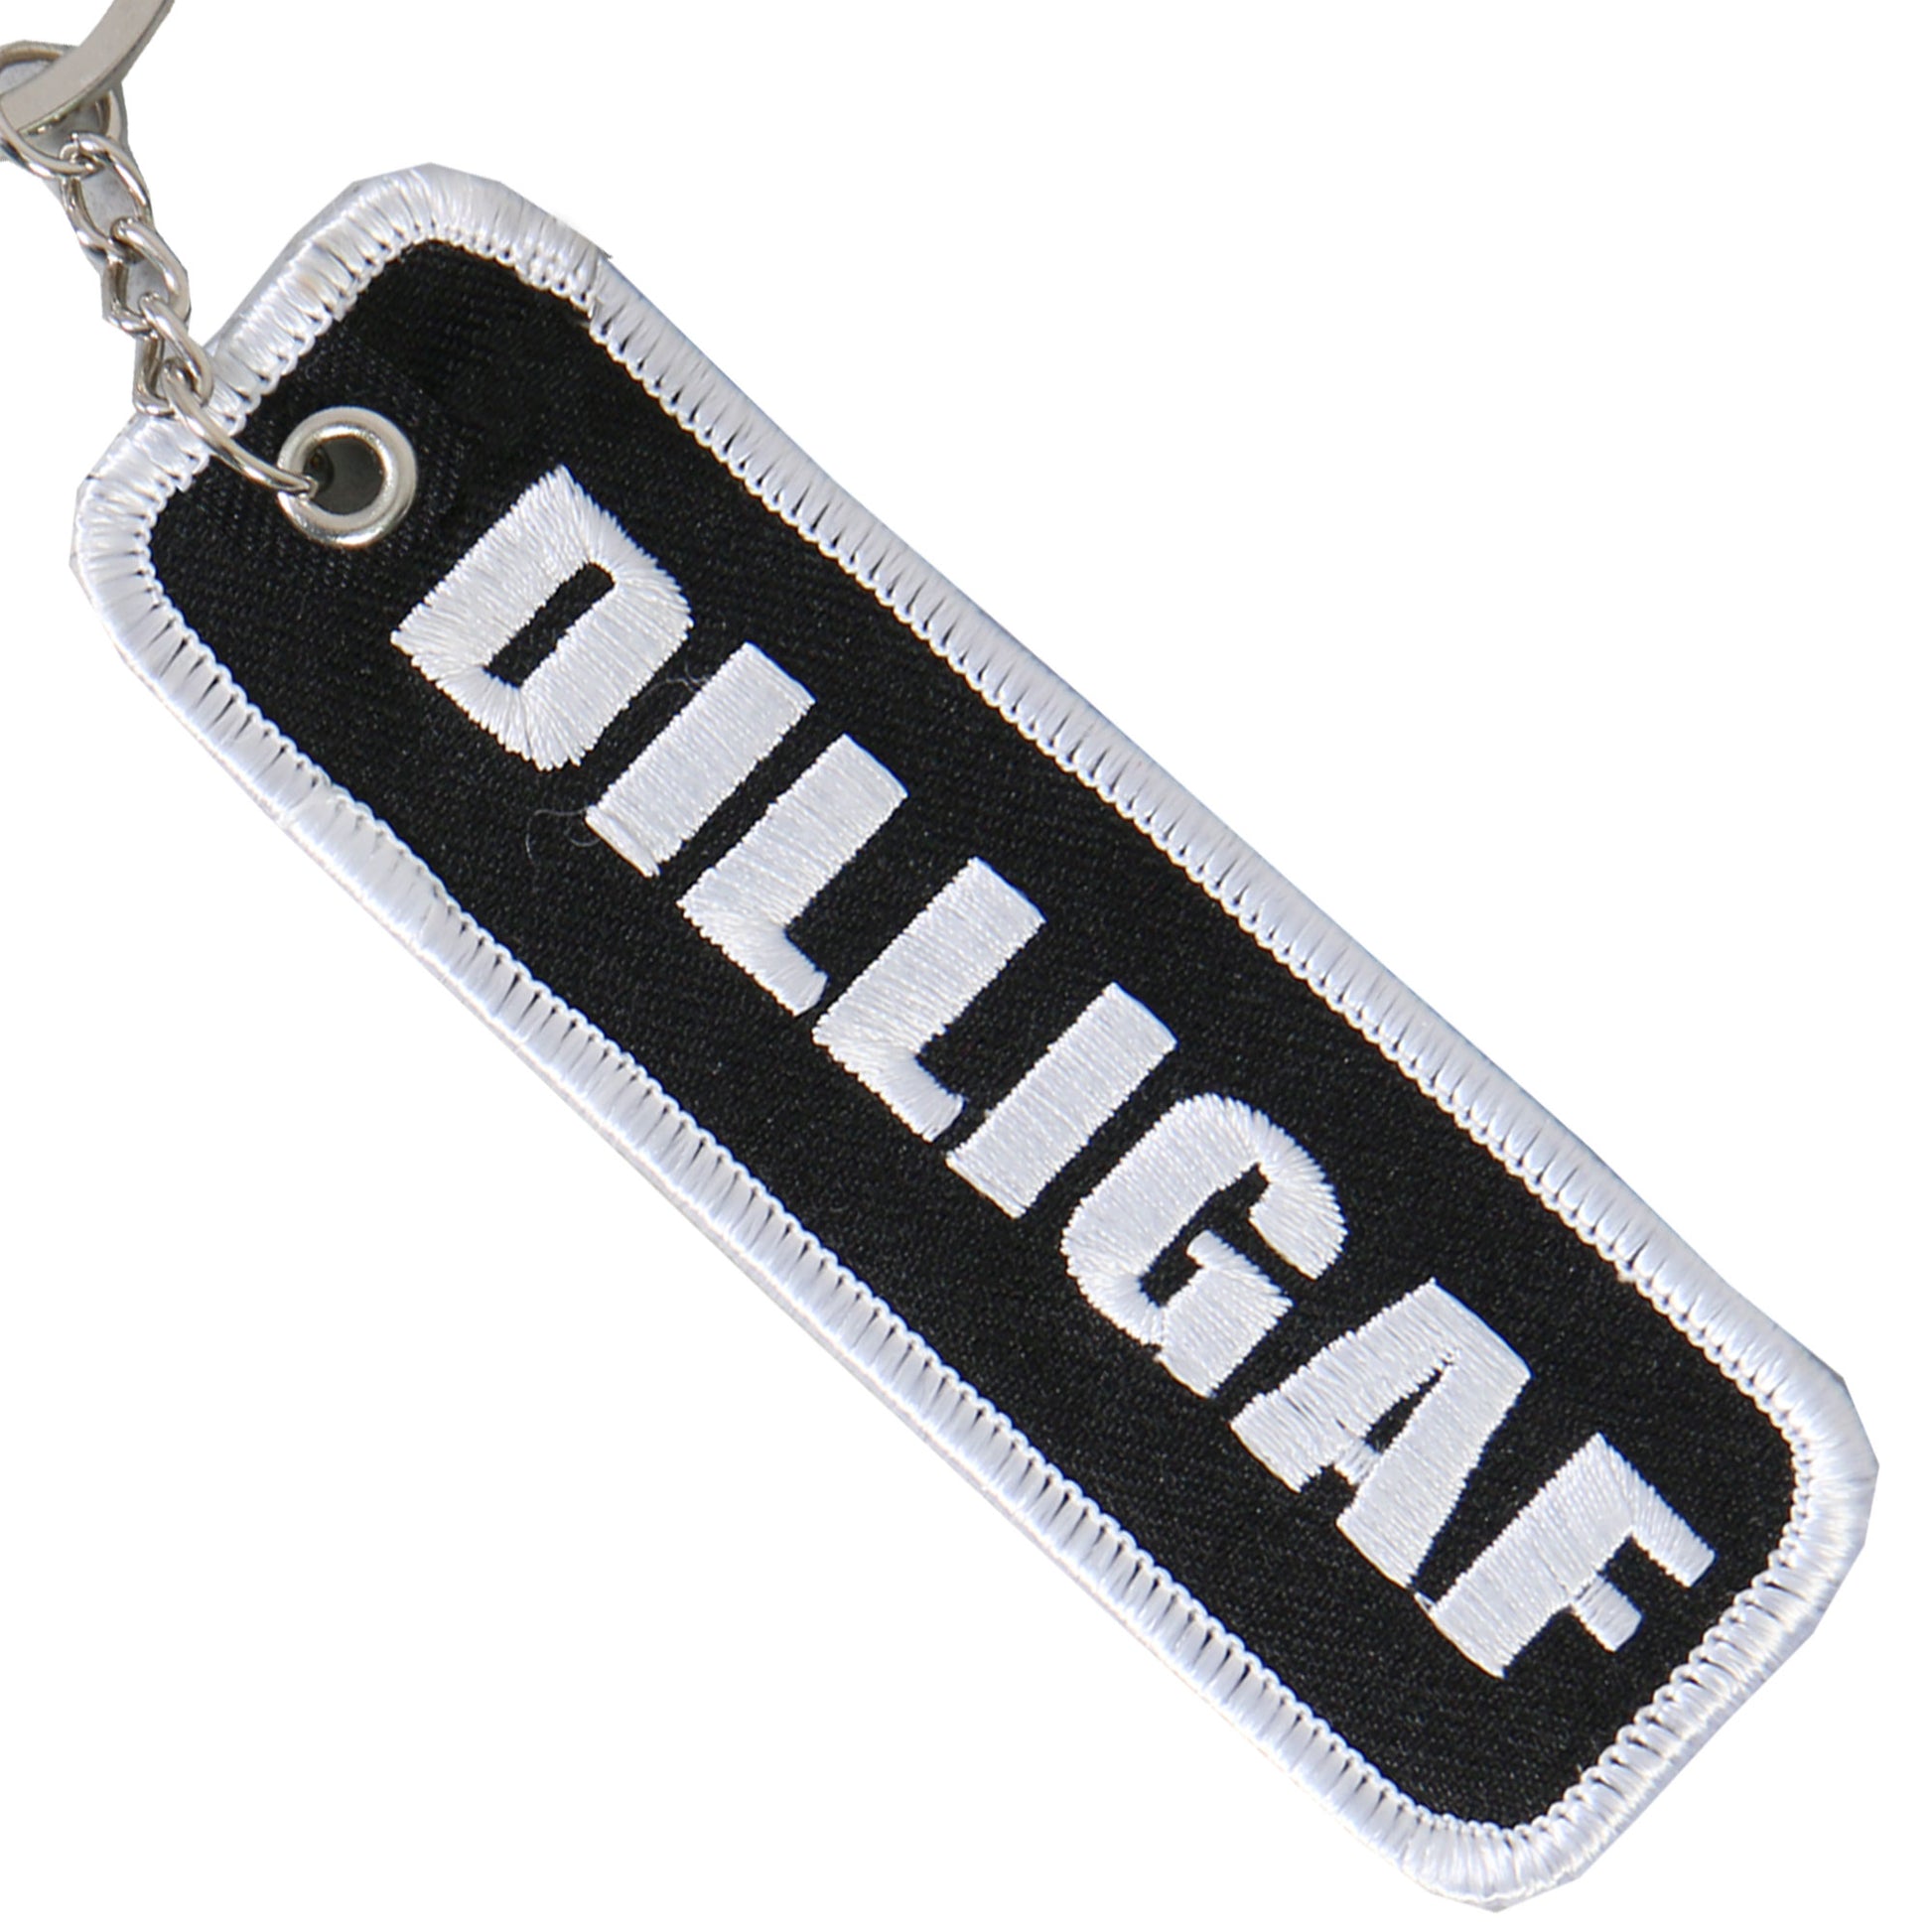 Hot Leathers KCH1030 DILLIGAF Embroidered Key Chain